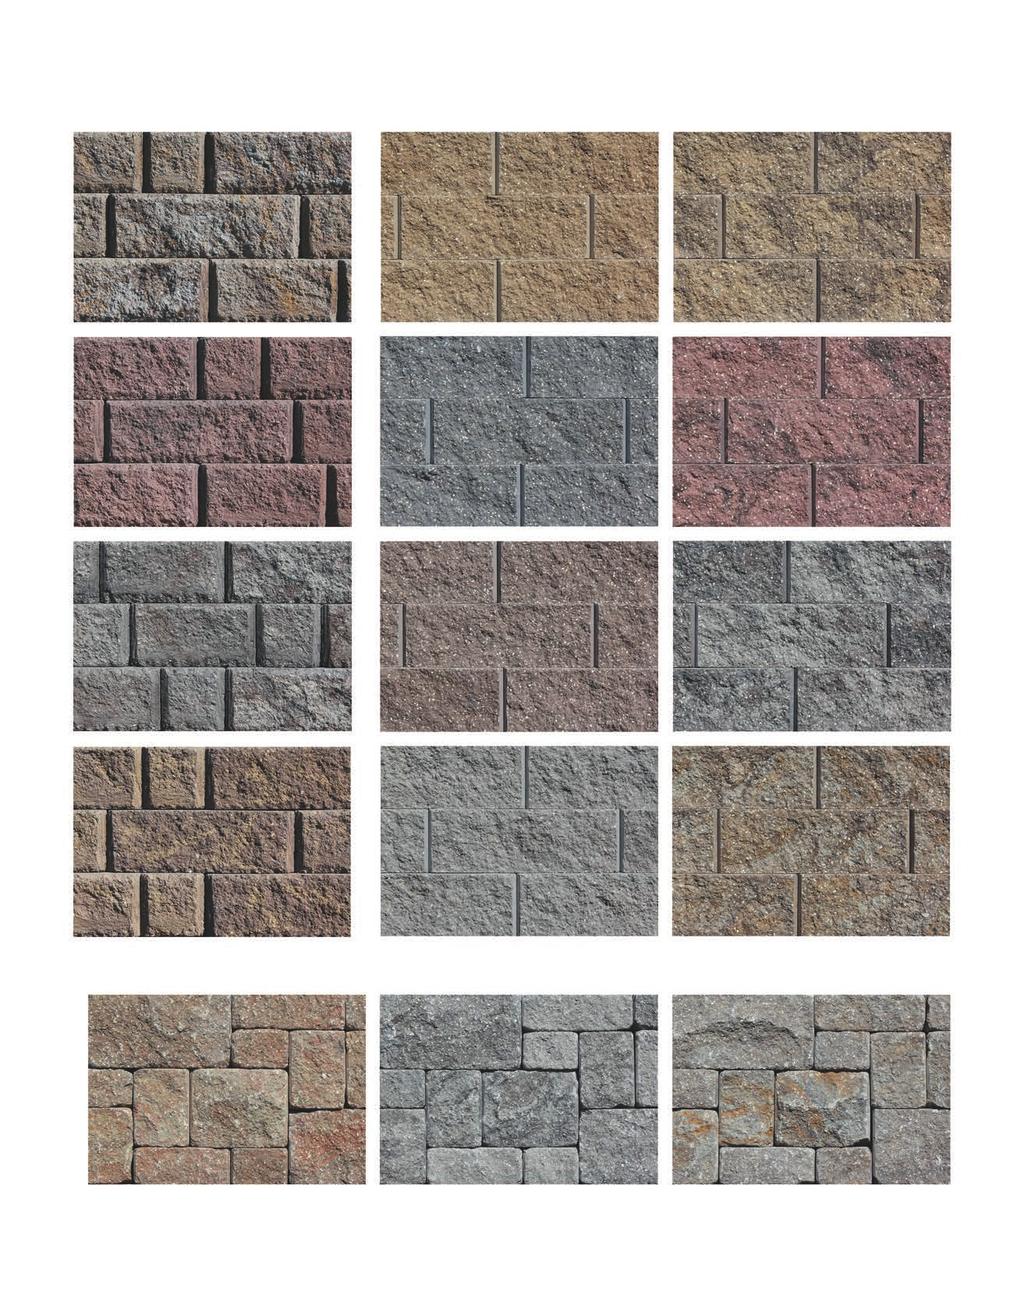 classic colonial (Rockwood) classic 6 and classic 8 (Rockwood) sandstone sandstone/brown monterey charcoal monterey brown sandstone/brown gray vintage TM (Rockwood) desert 14 Please note: All